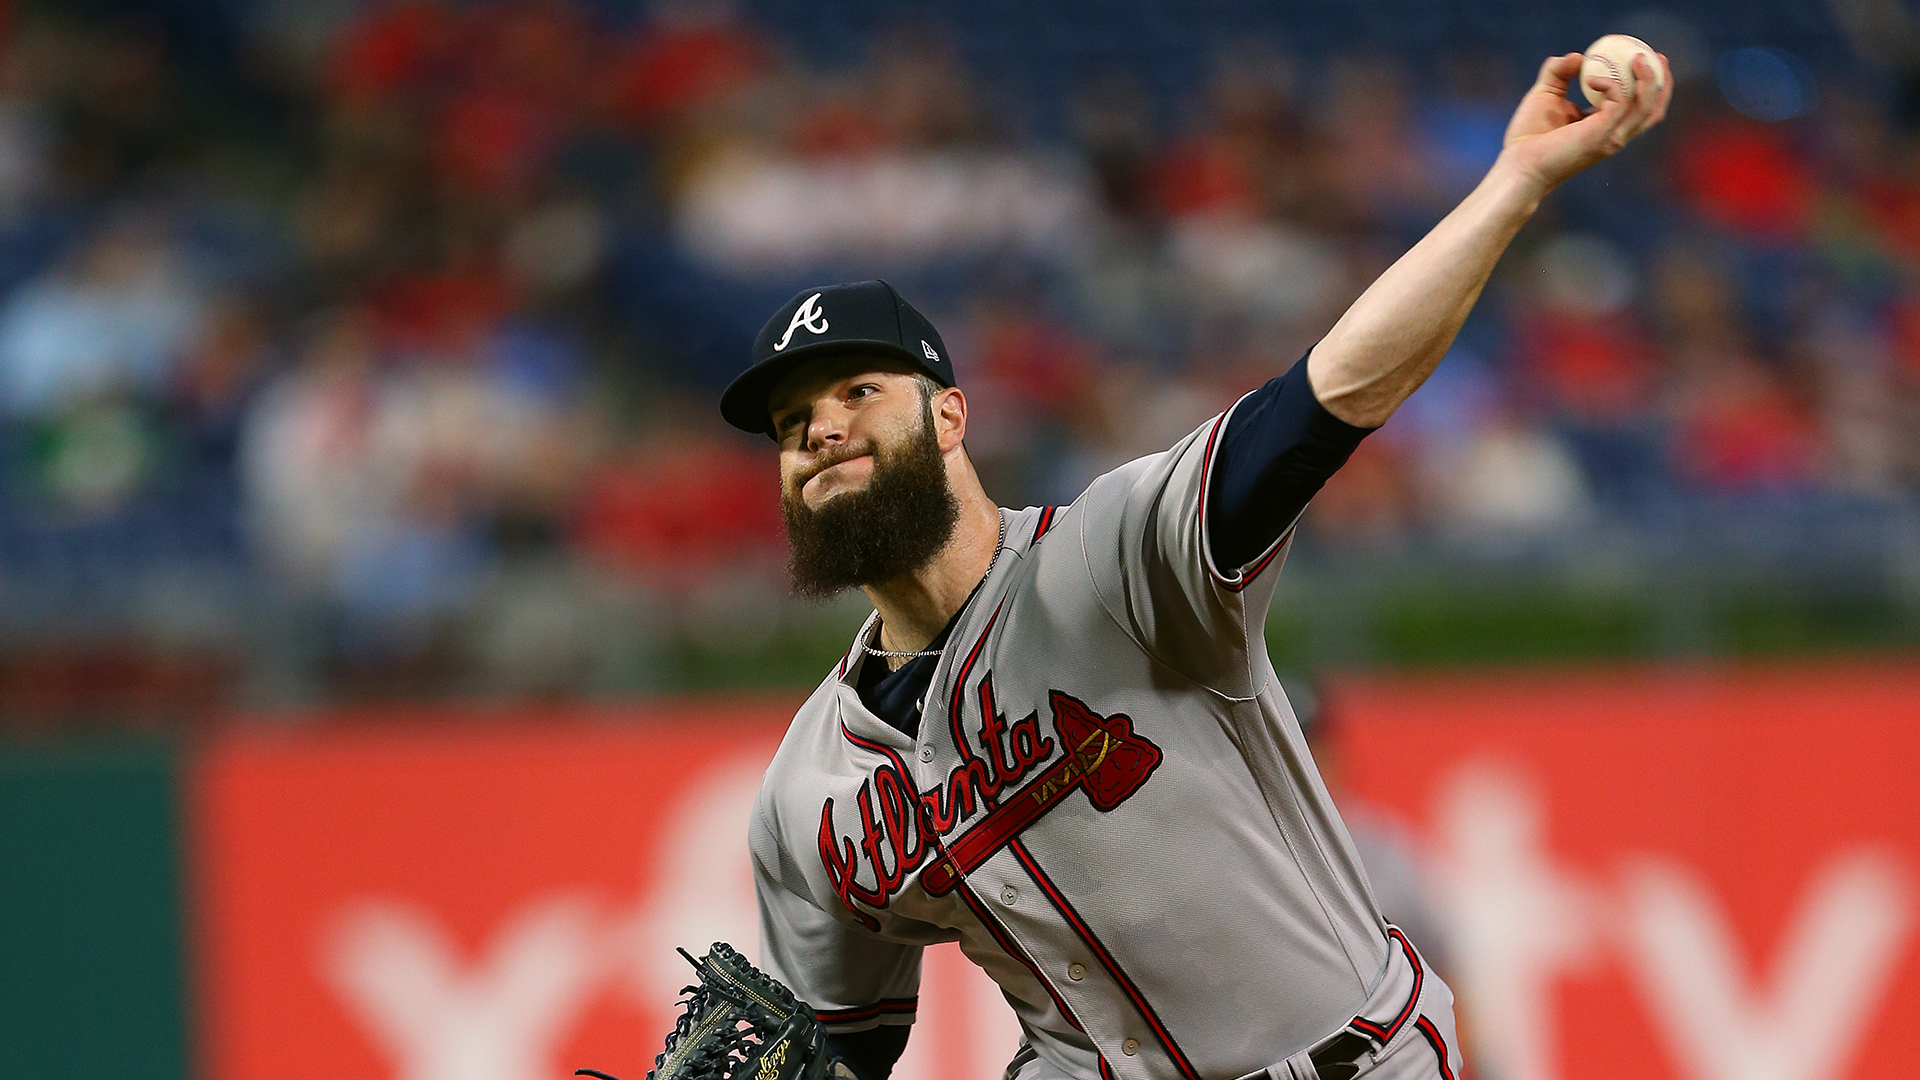 Keuchel tossed six innings of one-run ball in the Braves' 3-1 win over the Phillies on Wednesday.